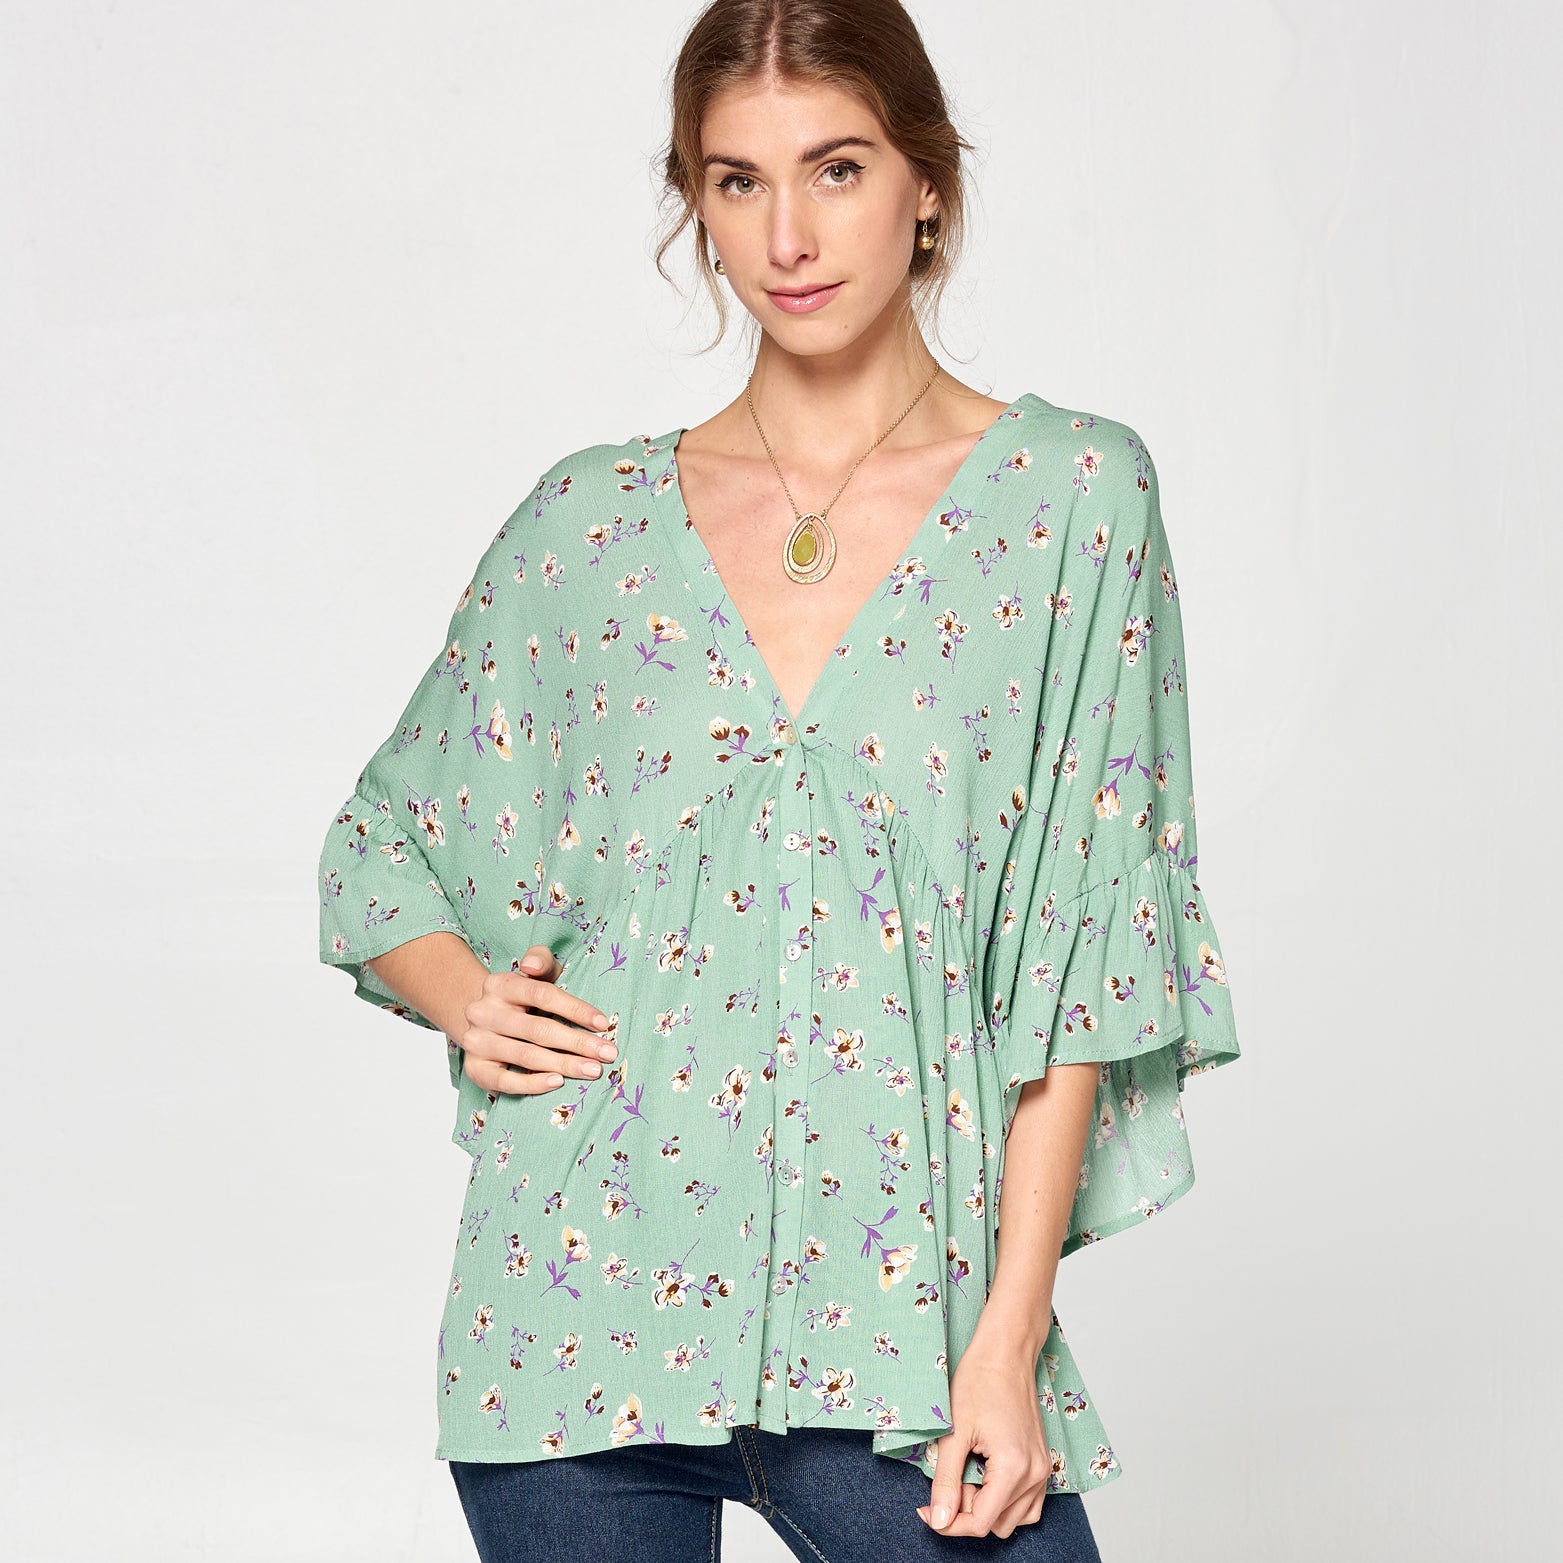 Calico Floral Woven Top - Love, Kuza